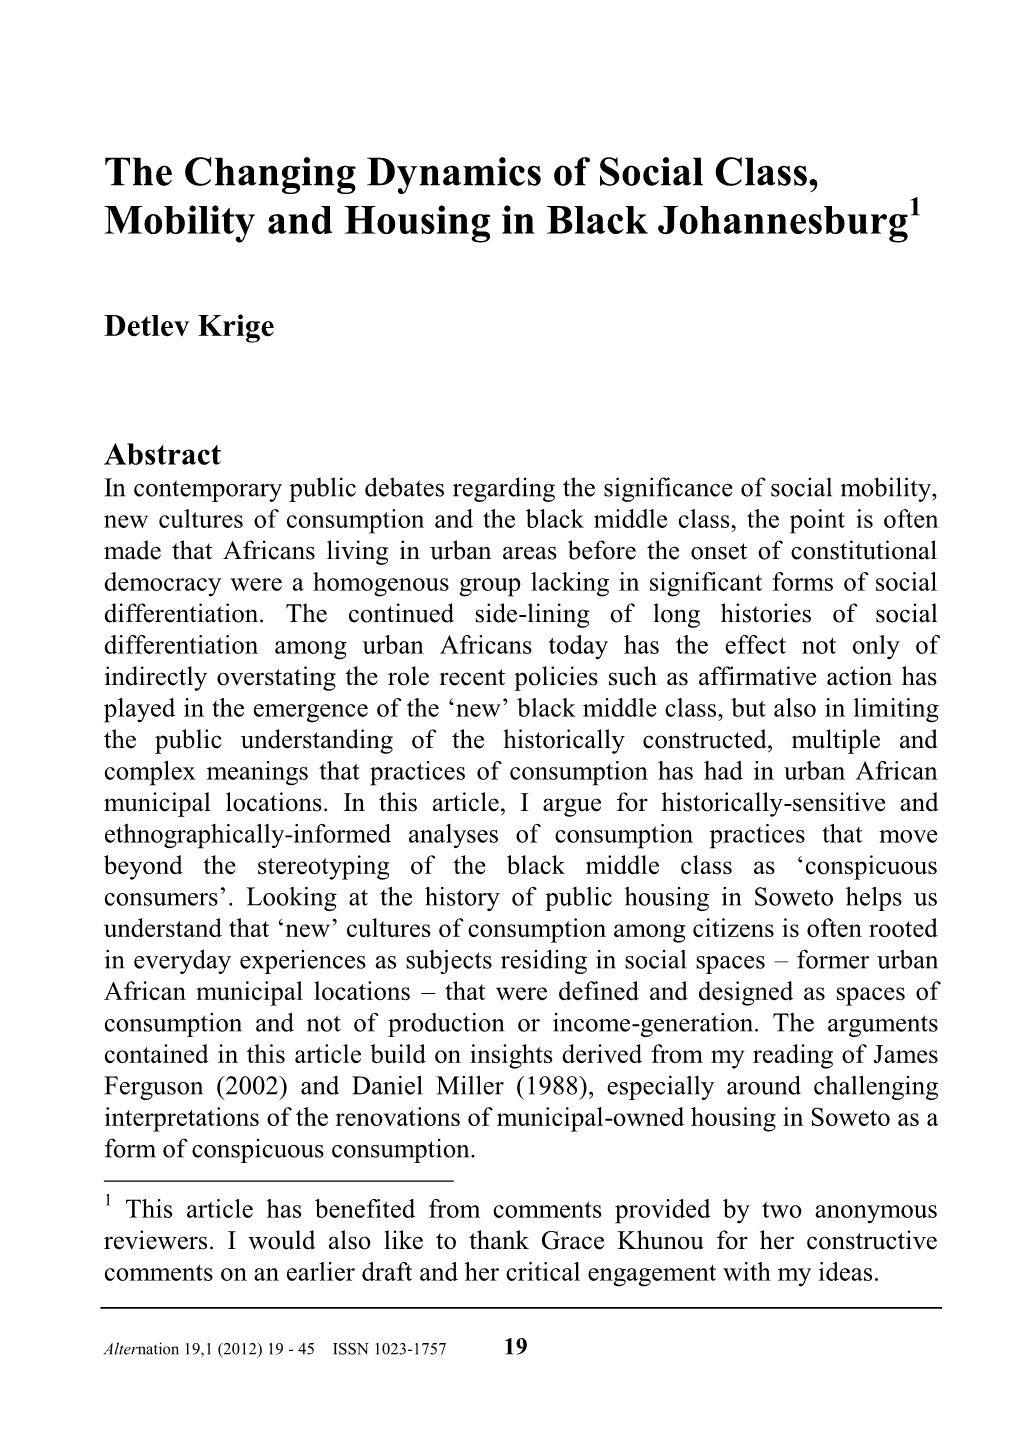 The Changing Dynamics of Social Class, Mobility and Housing in Black Johannesburg1